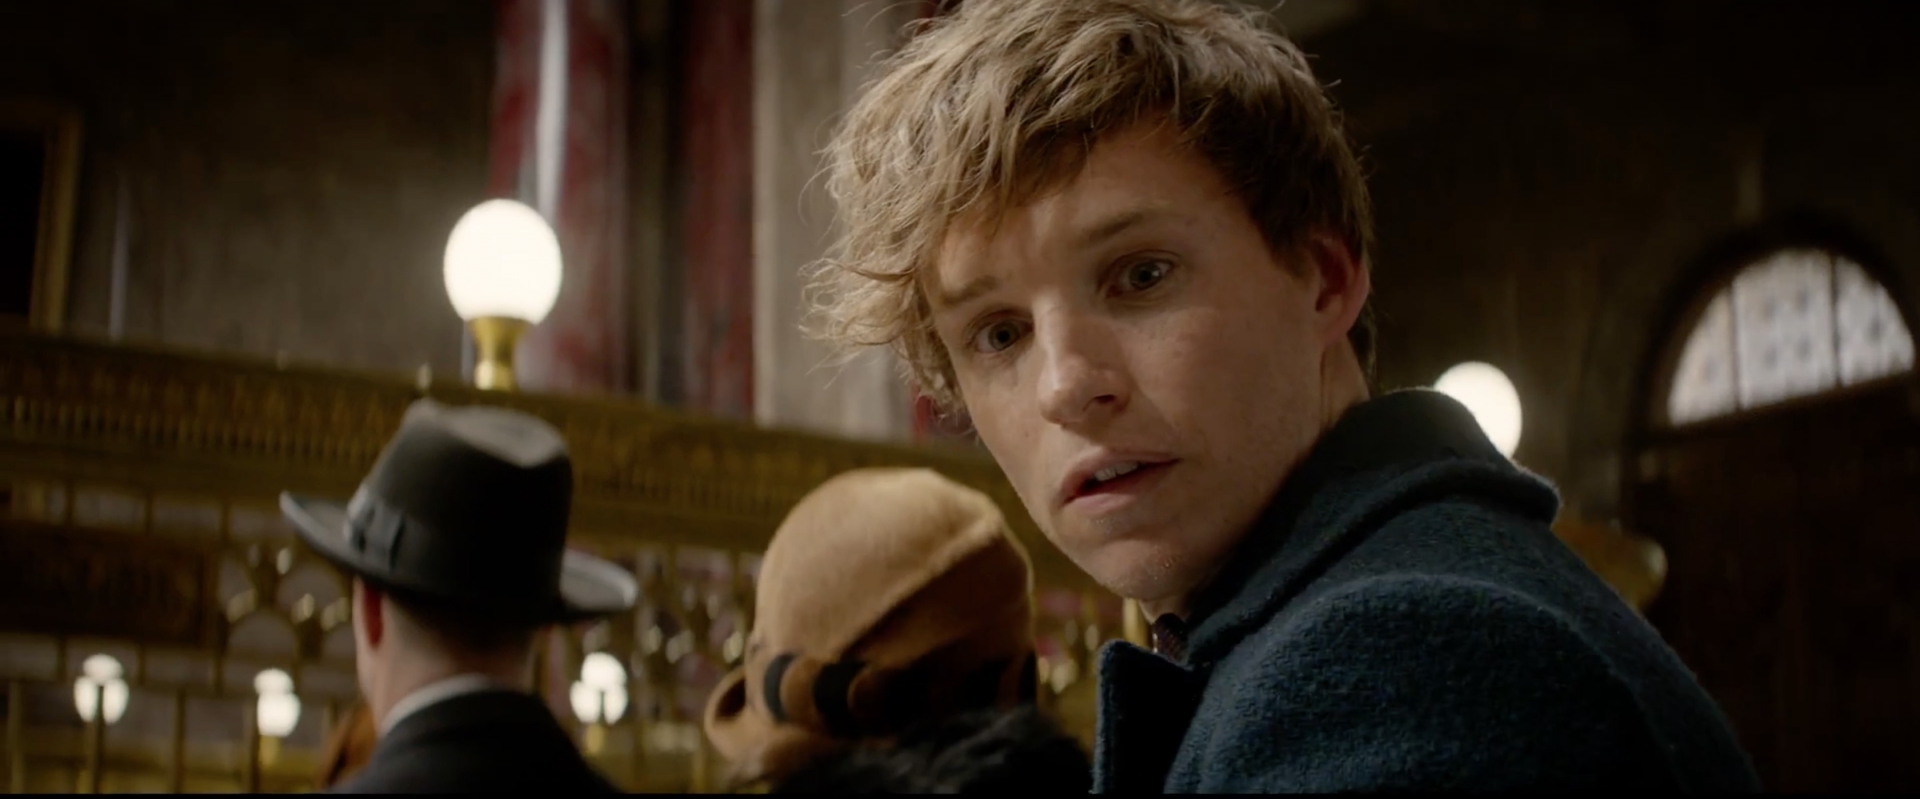 Online Hd Watch Fantastic Beasts And Where To Find Them 2016 Film